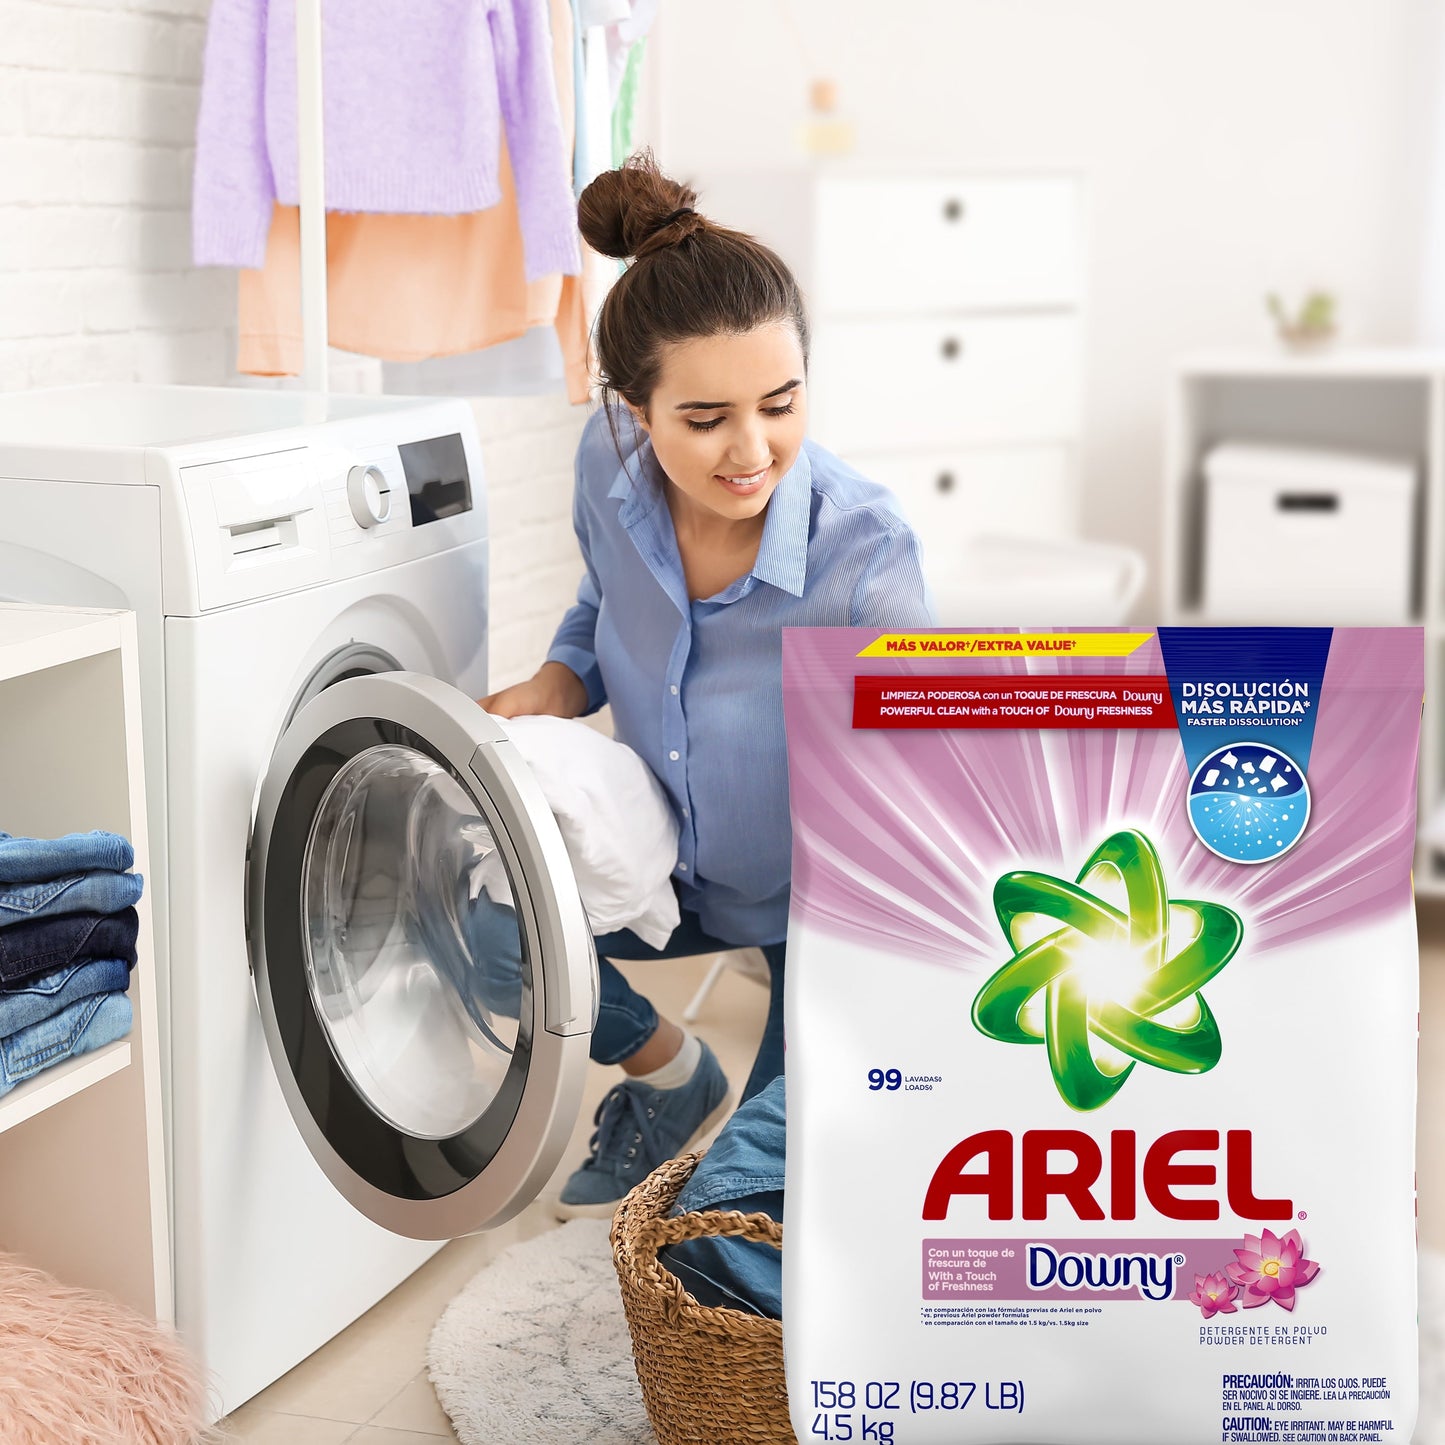 Ariel with a Touch of Downy Freshness, Powder Laundry Detergent, 158 oz, 99 Loads